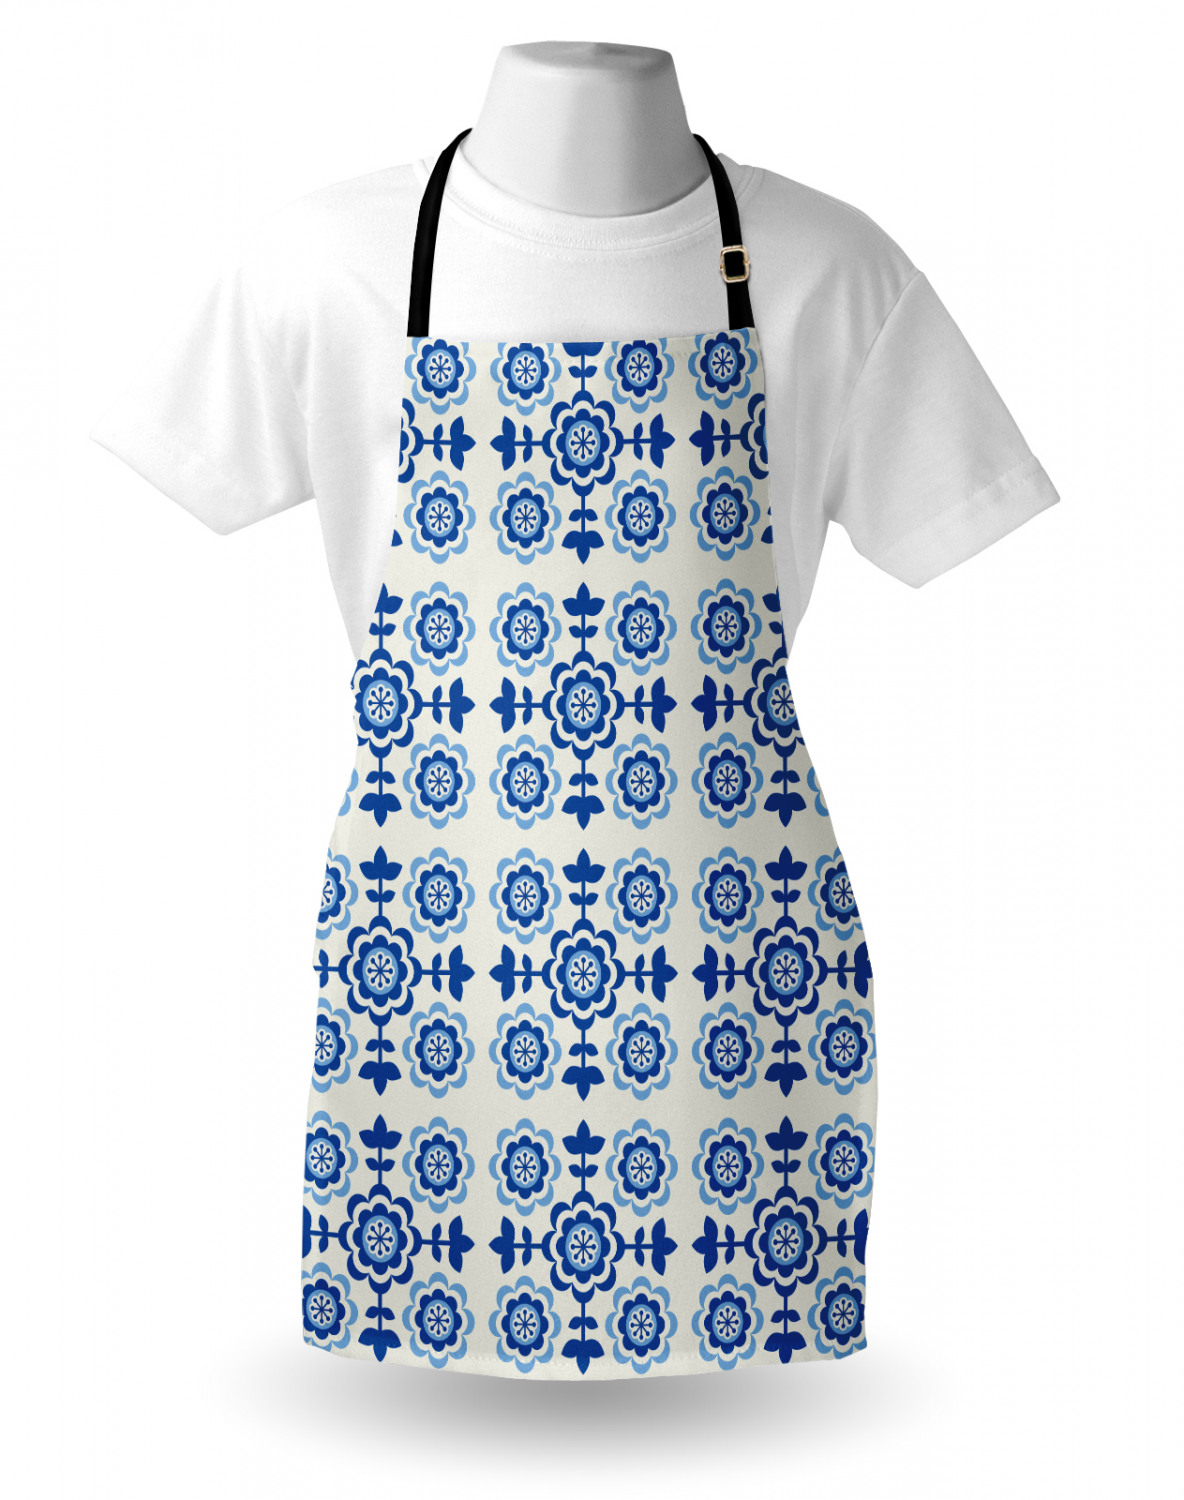 Details about   Ambesonne Apron Bib with Adjustable Neck for Garden Cooking Durable 